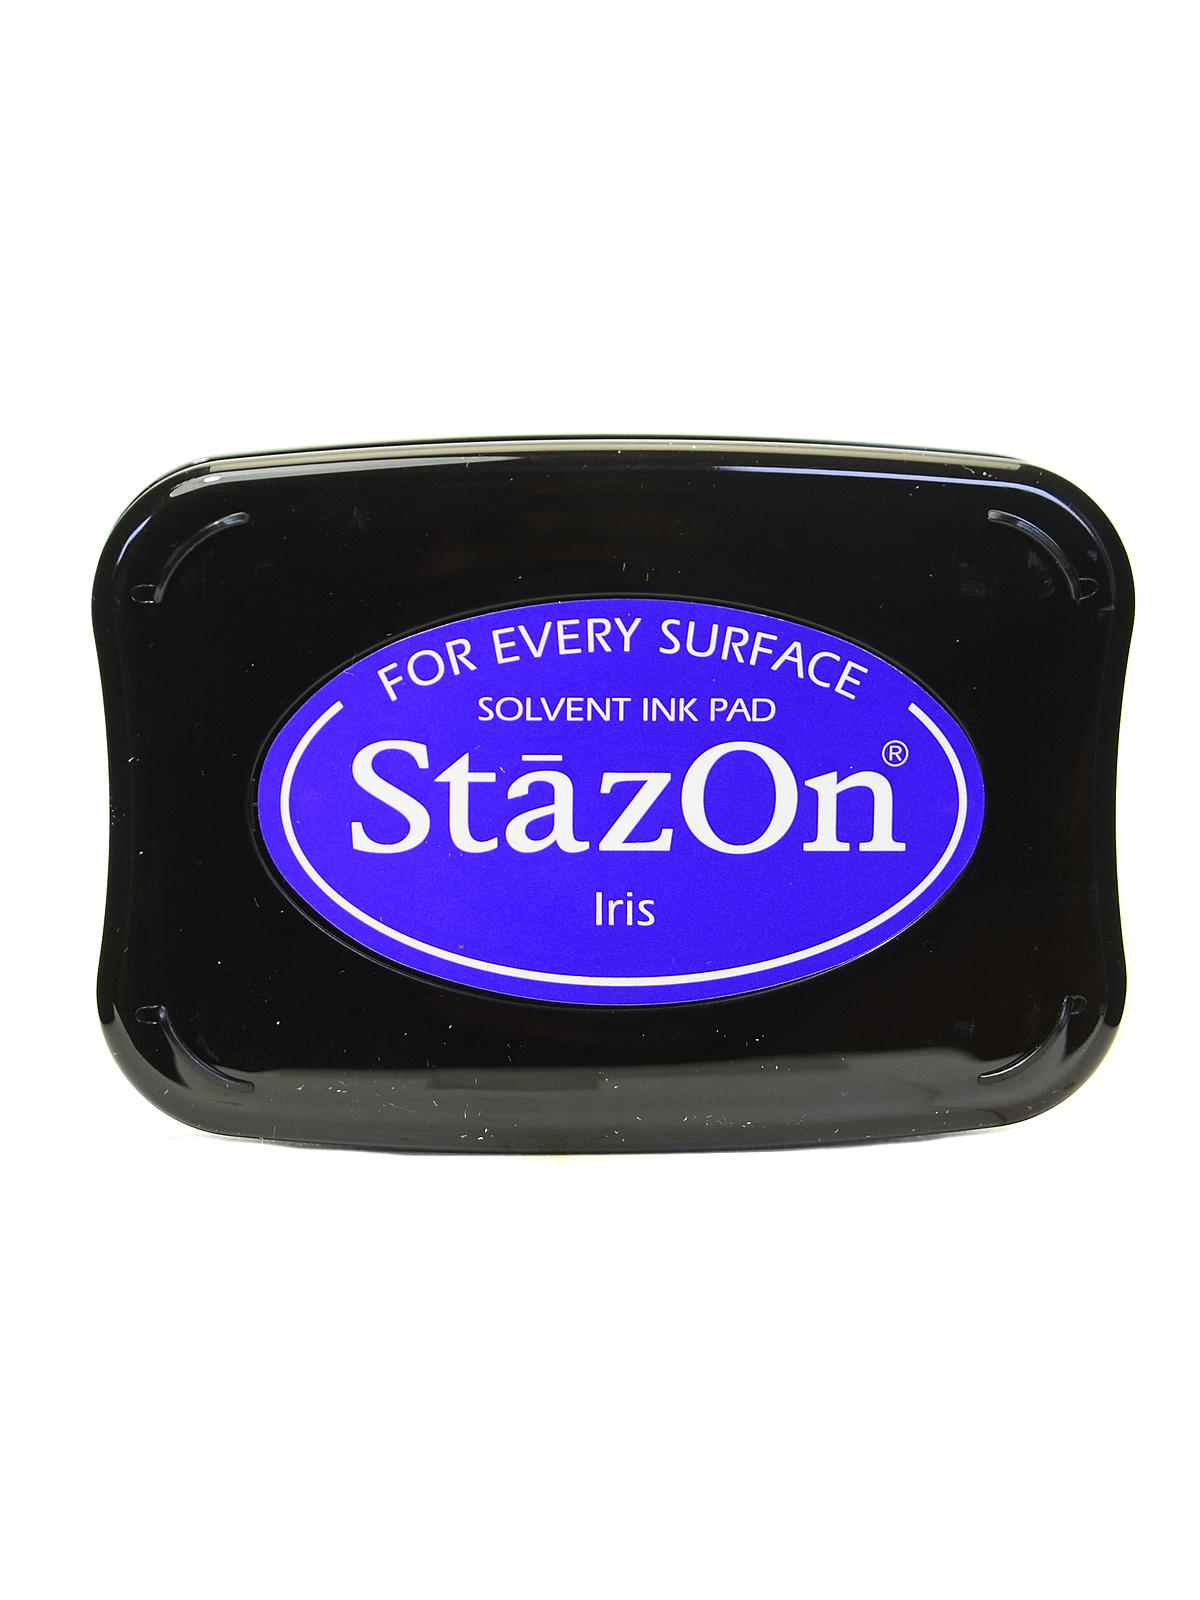 Stazon Solvent Ink Iris 3.75 In. X 2.625 In. Full-size Pad